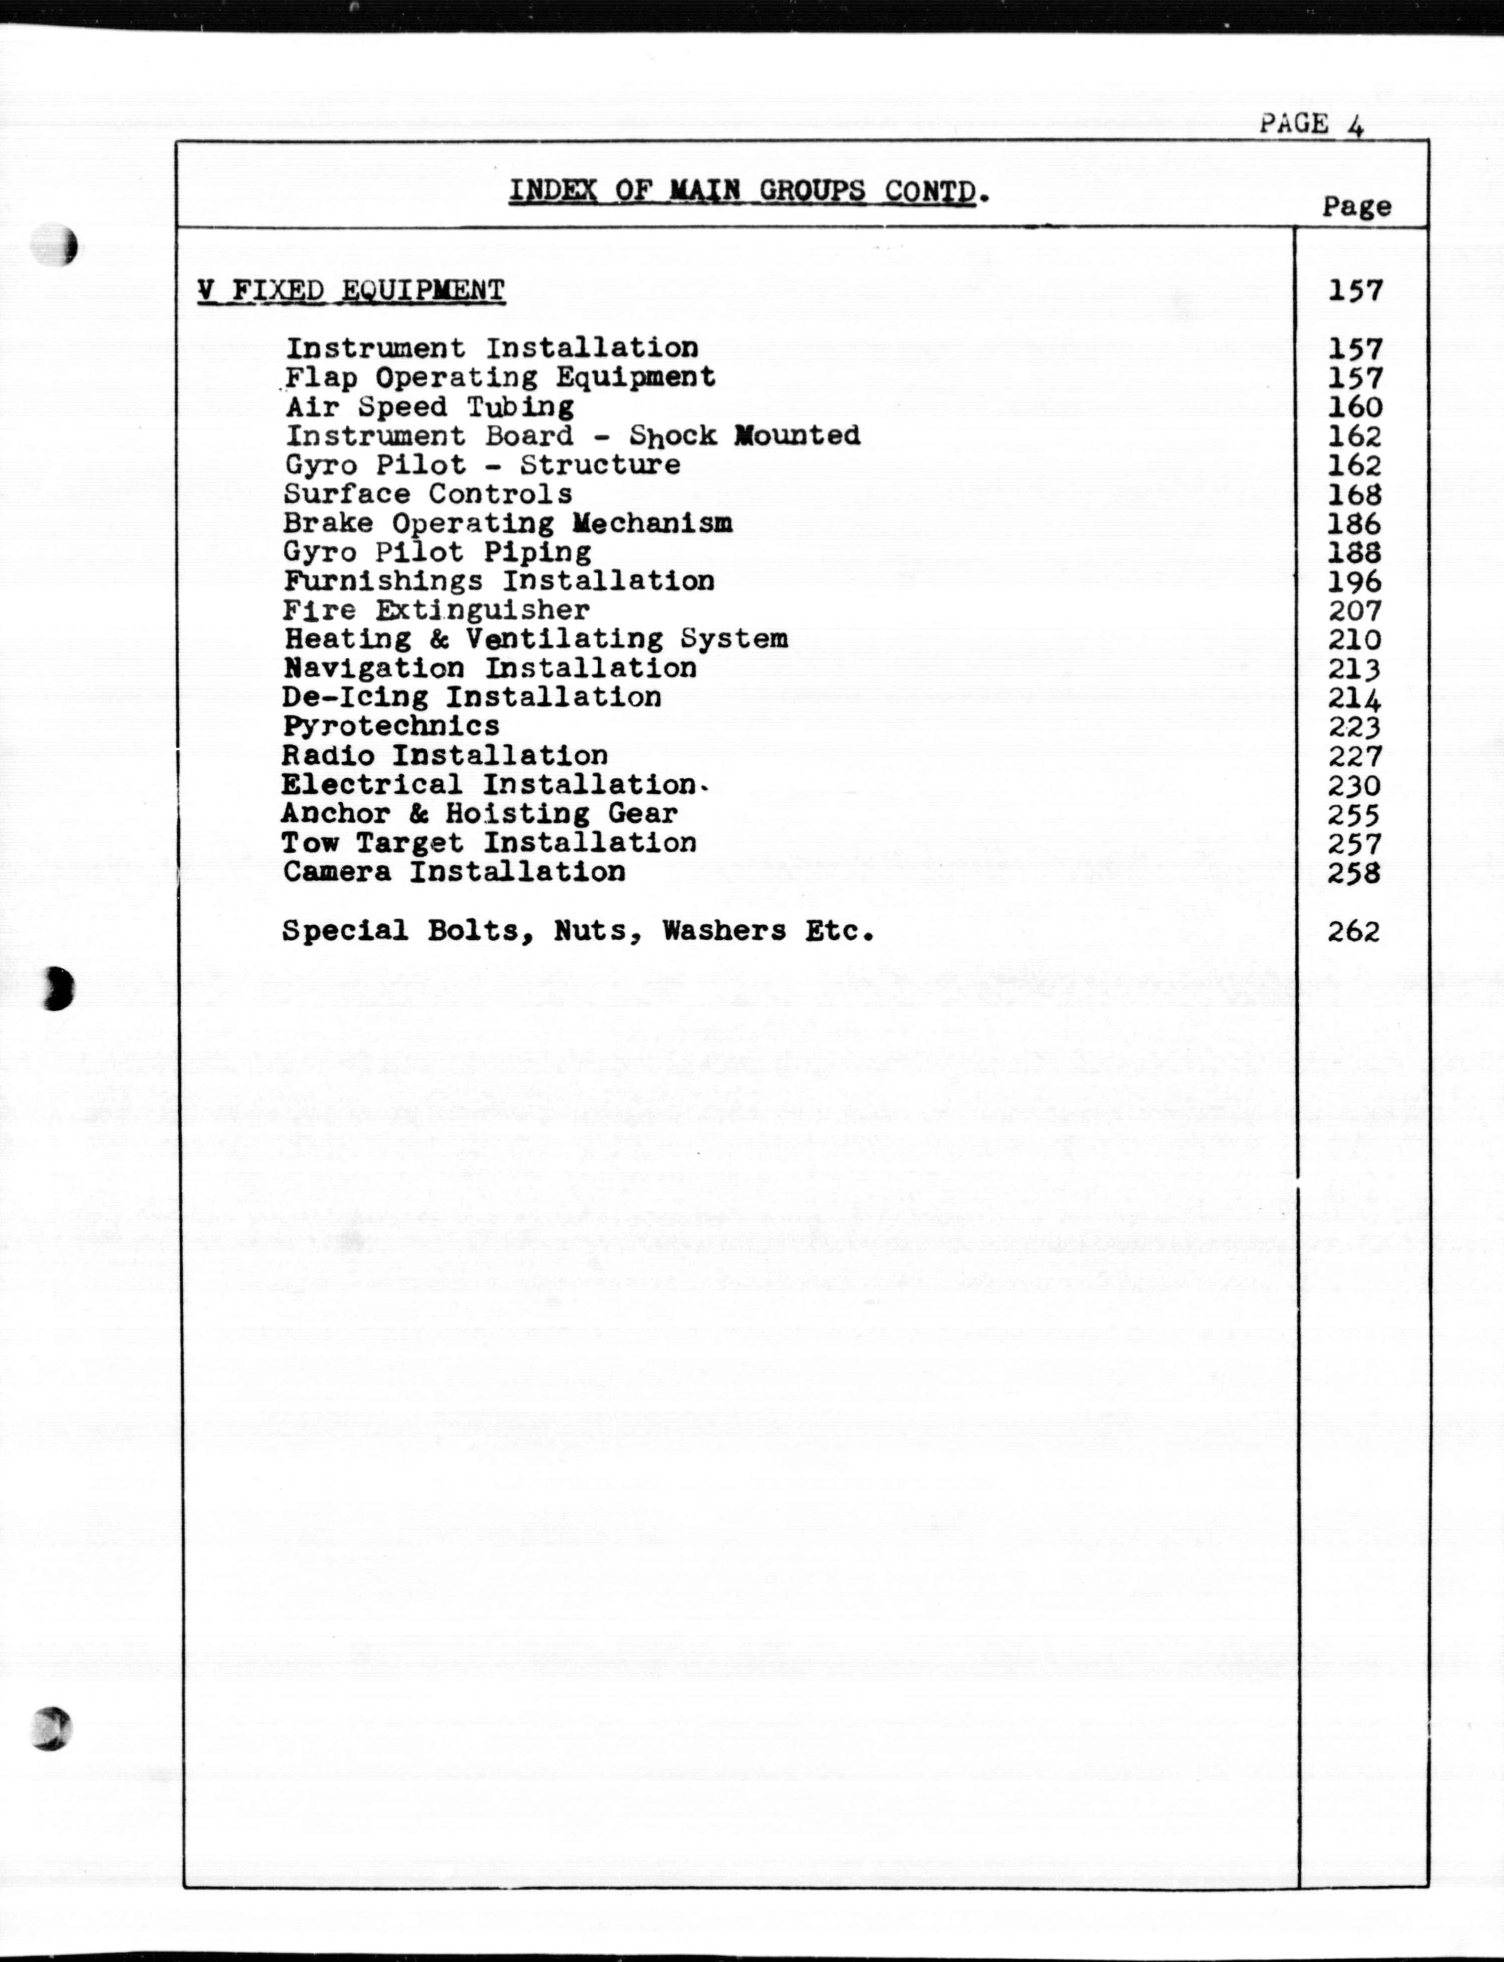 Sample page 4 from AirCorps Library document: Models JRF-1 & 1A Final Spare Parts List with Prices Contract No. 66303